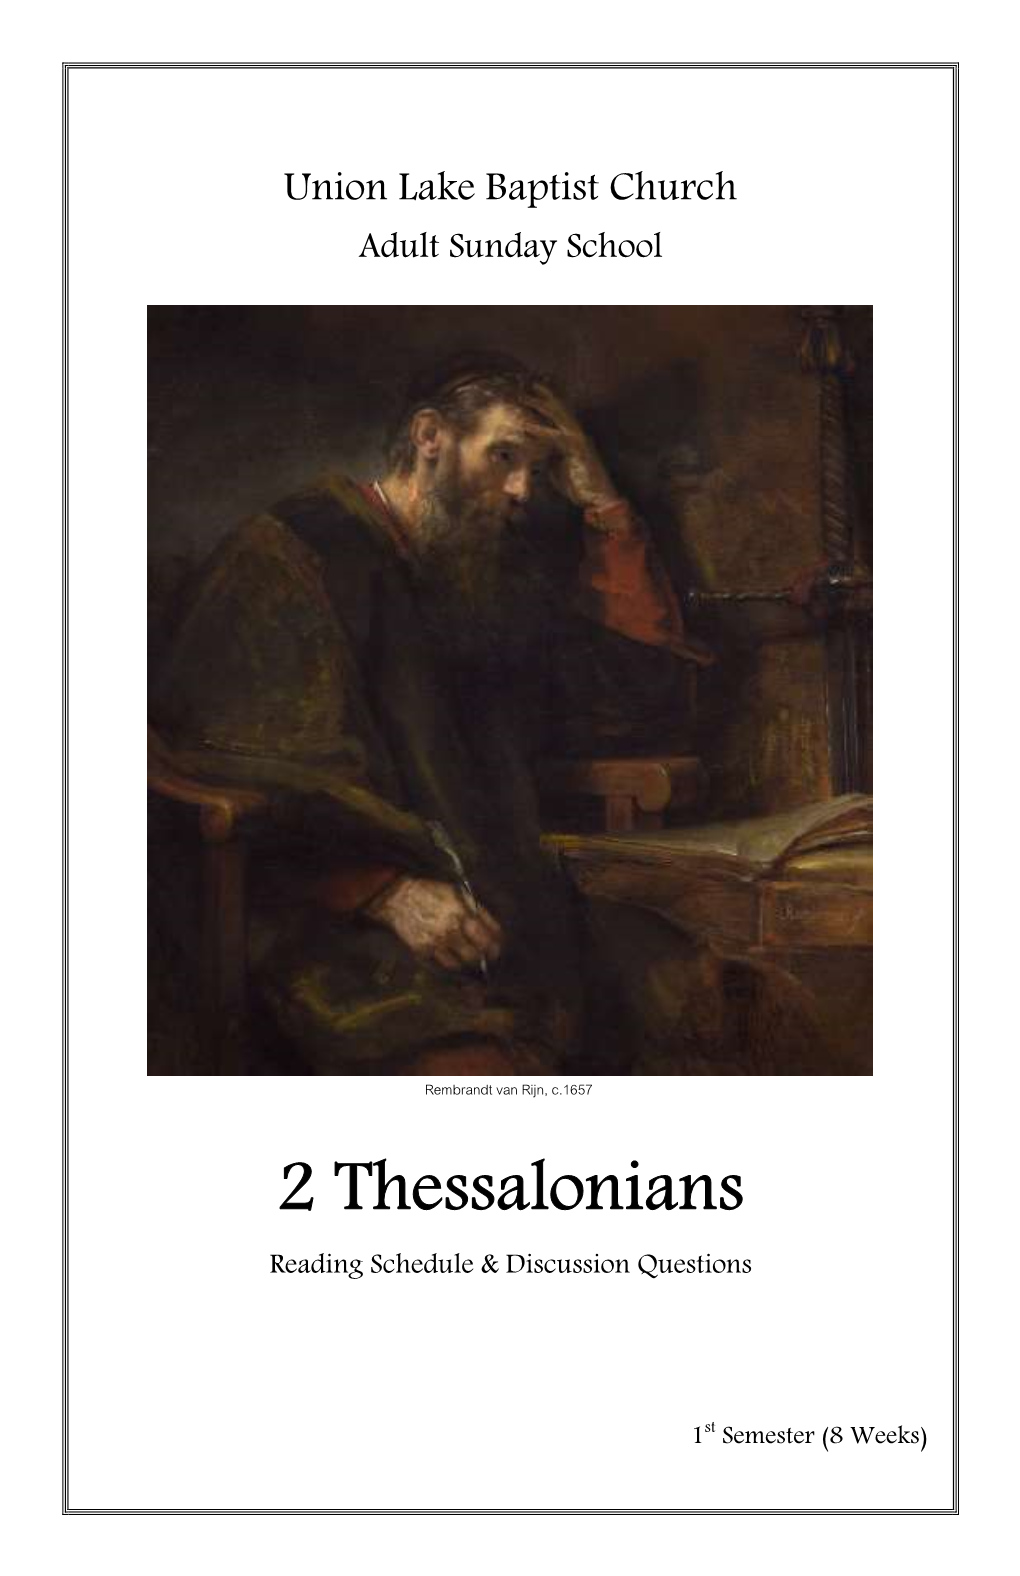 2 Thessalonians Reading Schedule & Discussion Questions